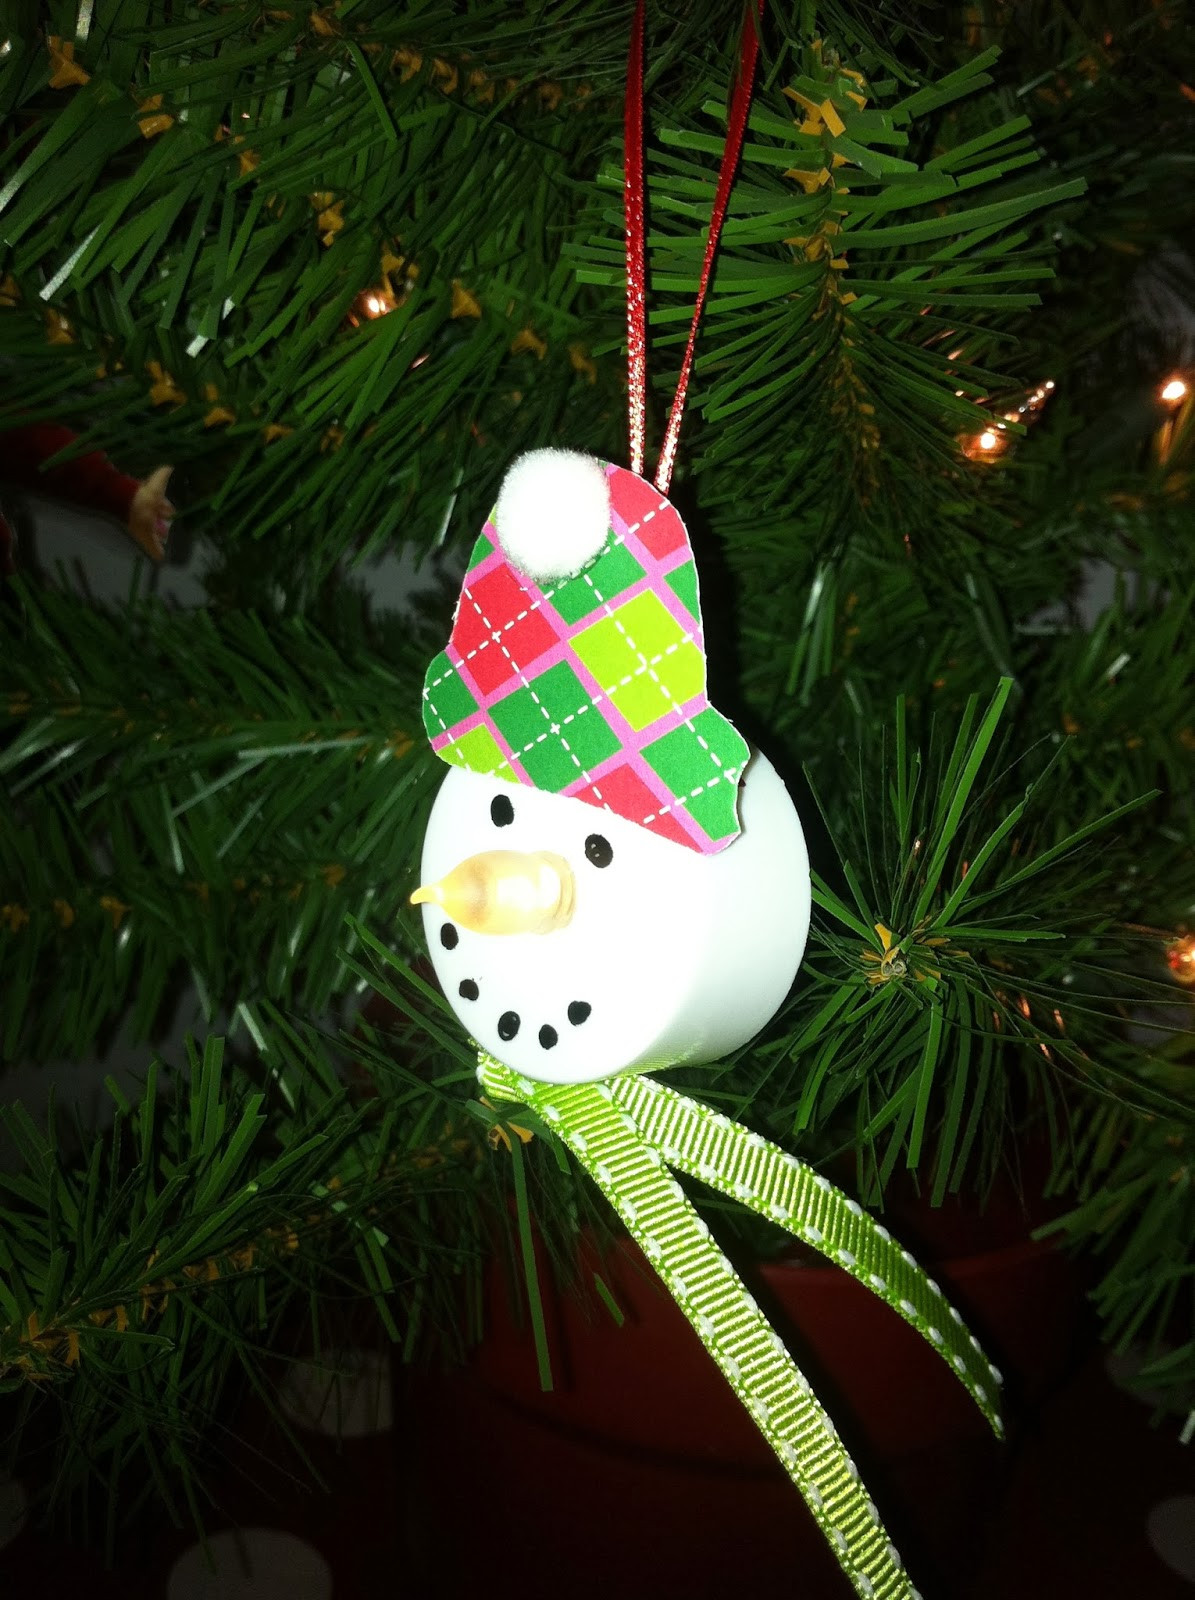 Preschool Christmas Ornament Craft Ideas
 Mrs Goff s Pre K Tales Adorable Holiday Gifts for My